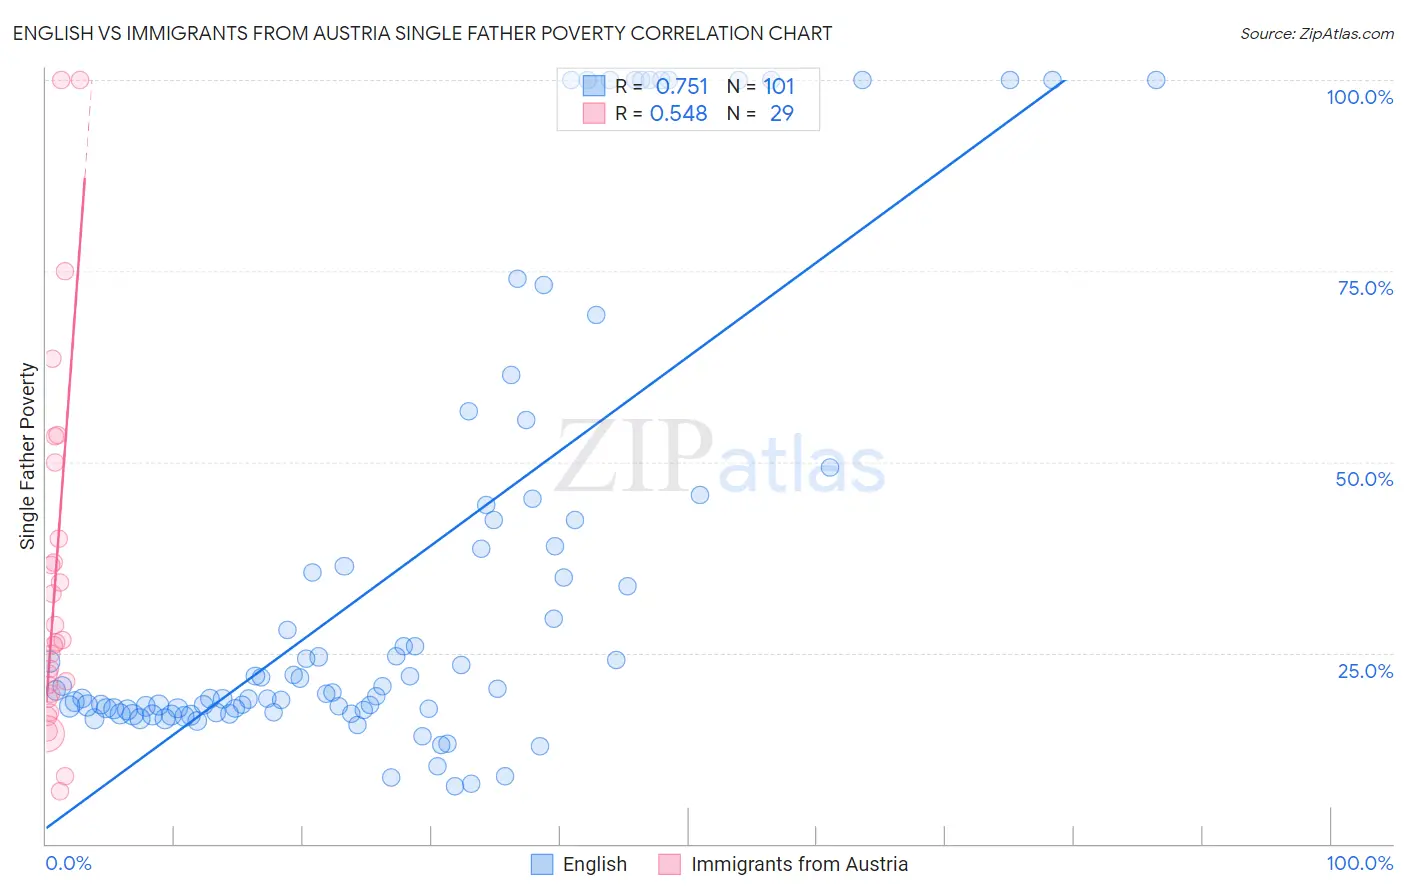 English vs Immigrants from Austria Single Father Poverty